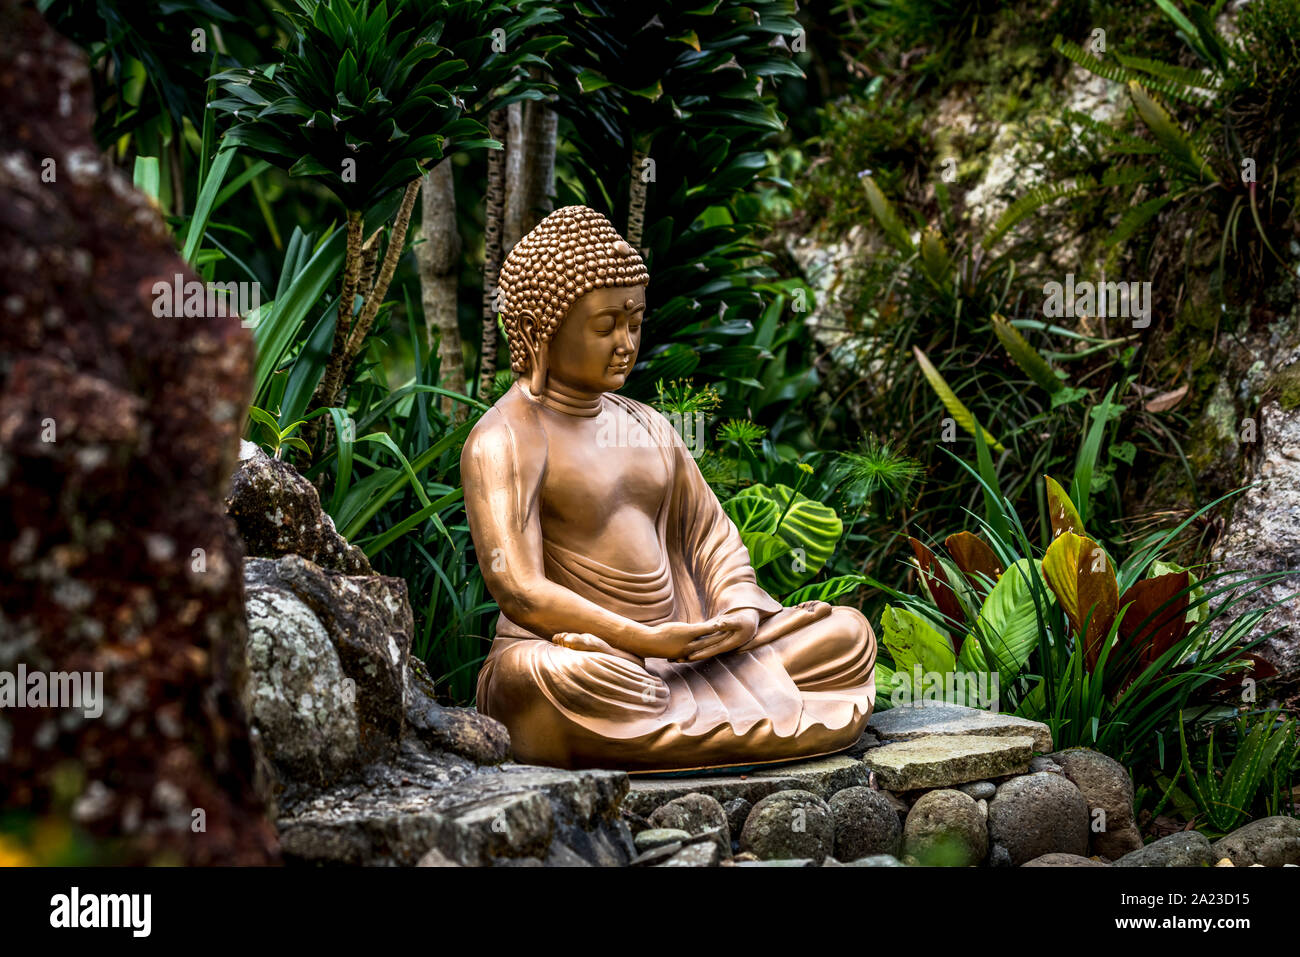 Golden buddha statue in a stone garden with green plants in the background Stock Photo